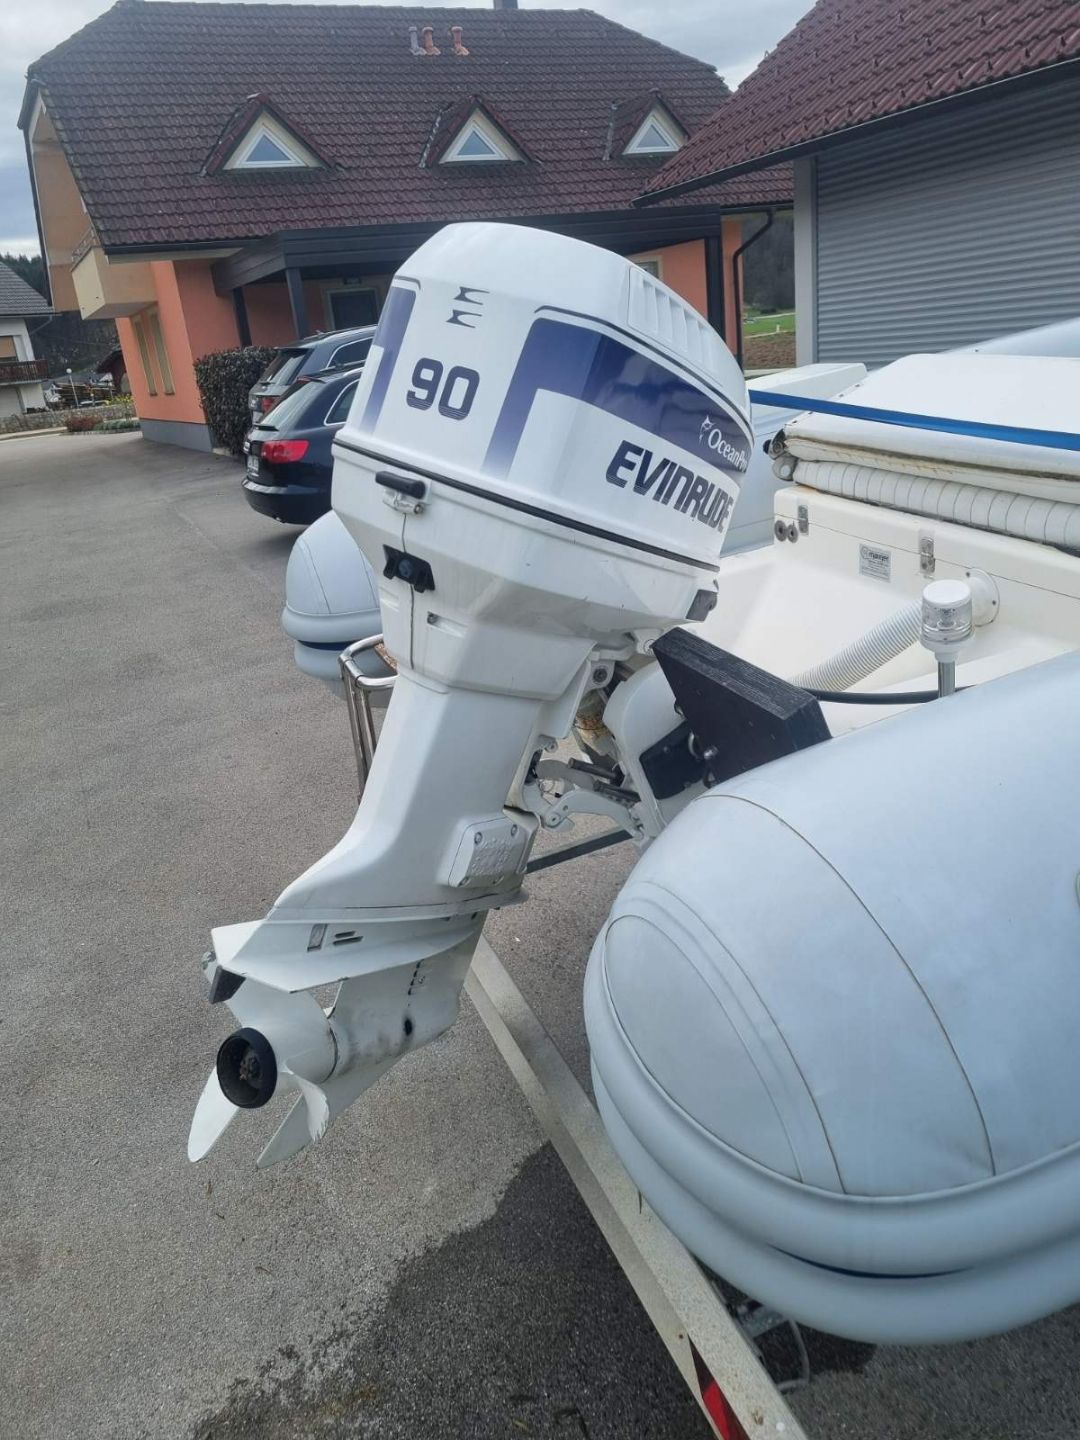 Evinrude boats for sale